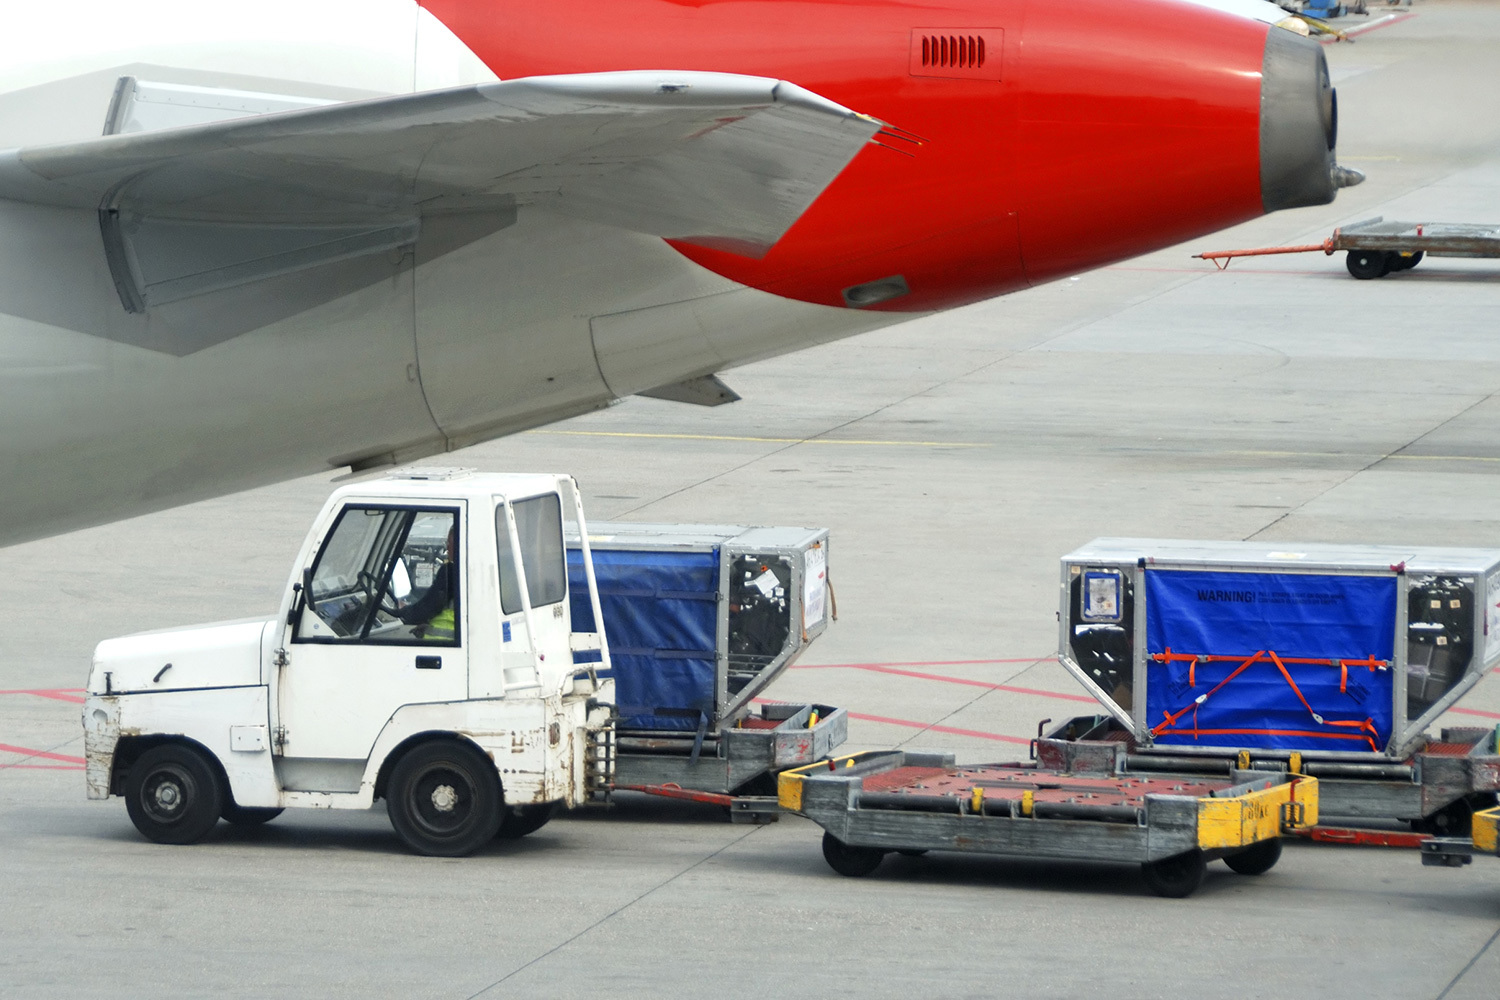 <span style="font-weight: bold;">Air Freight</span><br>